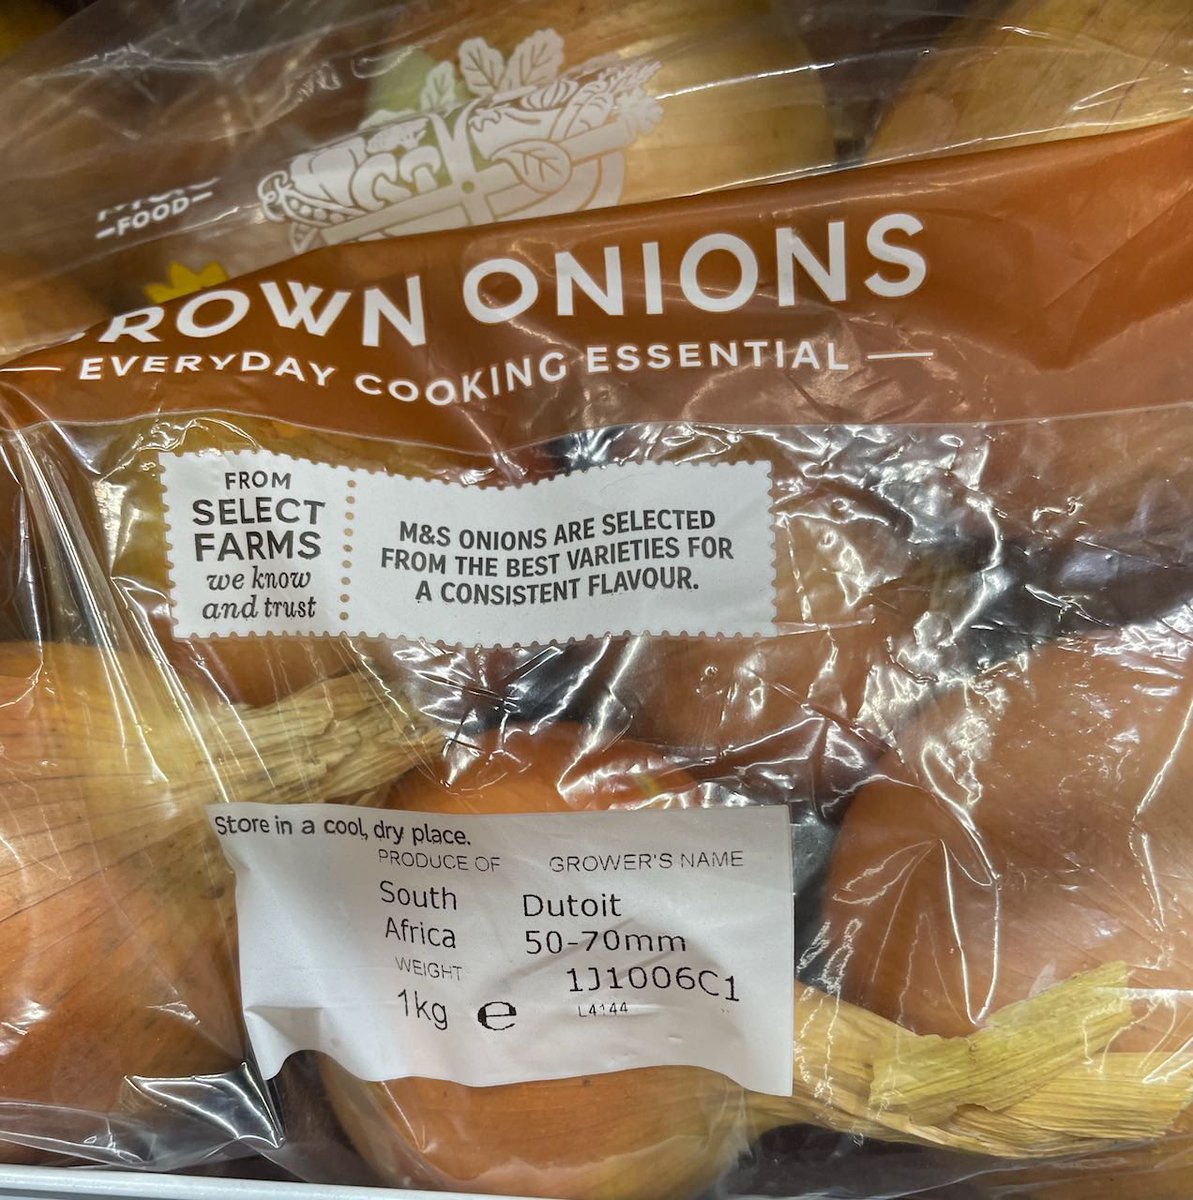 @marksandspencer @AledNfu @NFUtweets @Minette_Batters @1GarethWynJones Every brown onion on sale in M&S Chipping Norton today had been shipped from South Africa. UK farmers produce the best onions so why ship them in? An honest answer please M&S. #supportukfarmers #buylocal